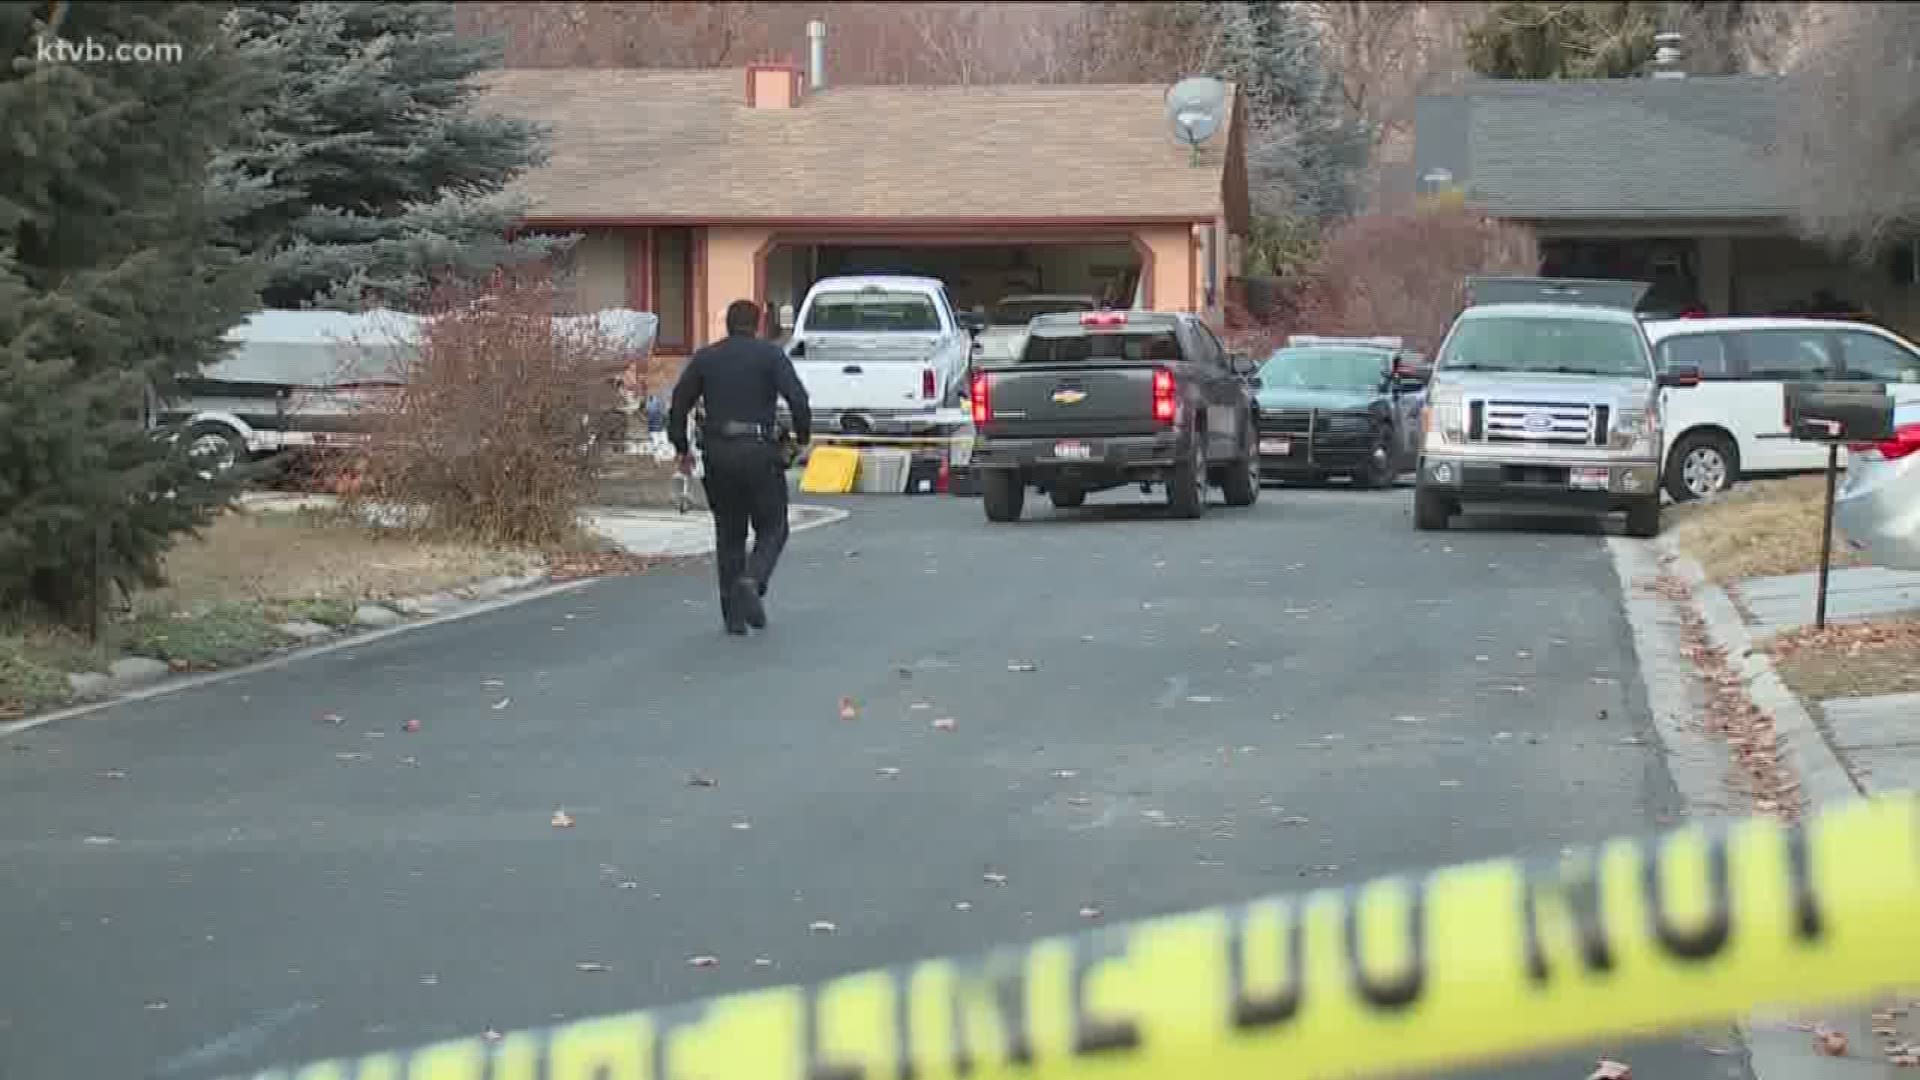 The victim was a 56-year-old woman, who was found dead at a home near the intersection of State and Bloom streets in Boise.